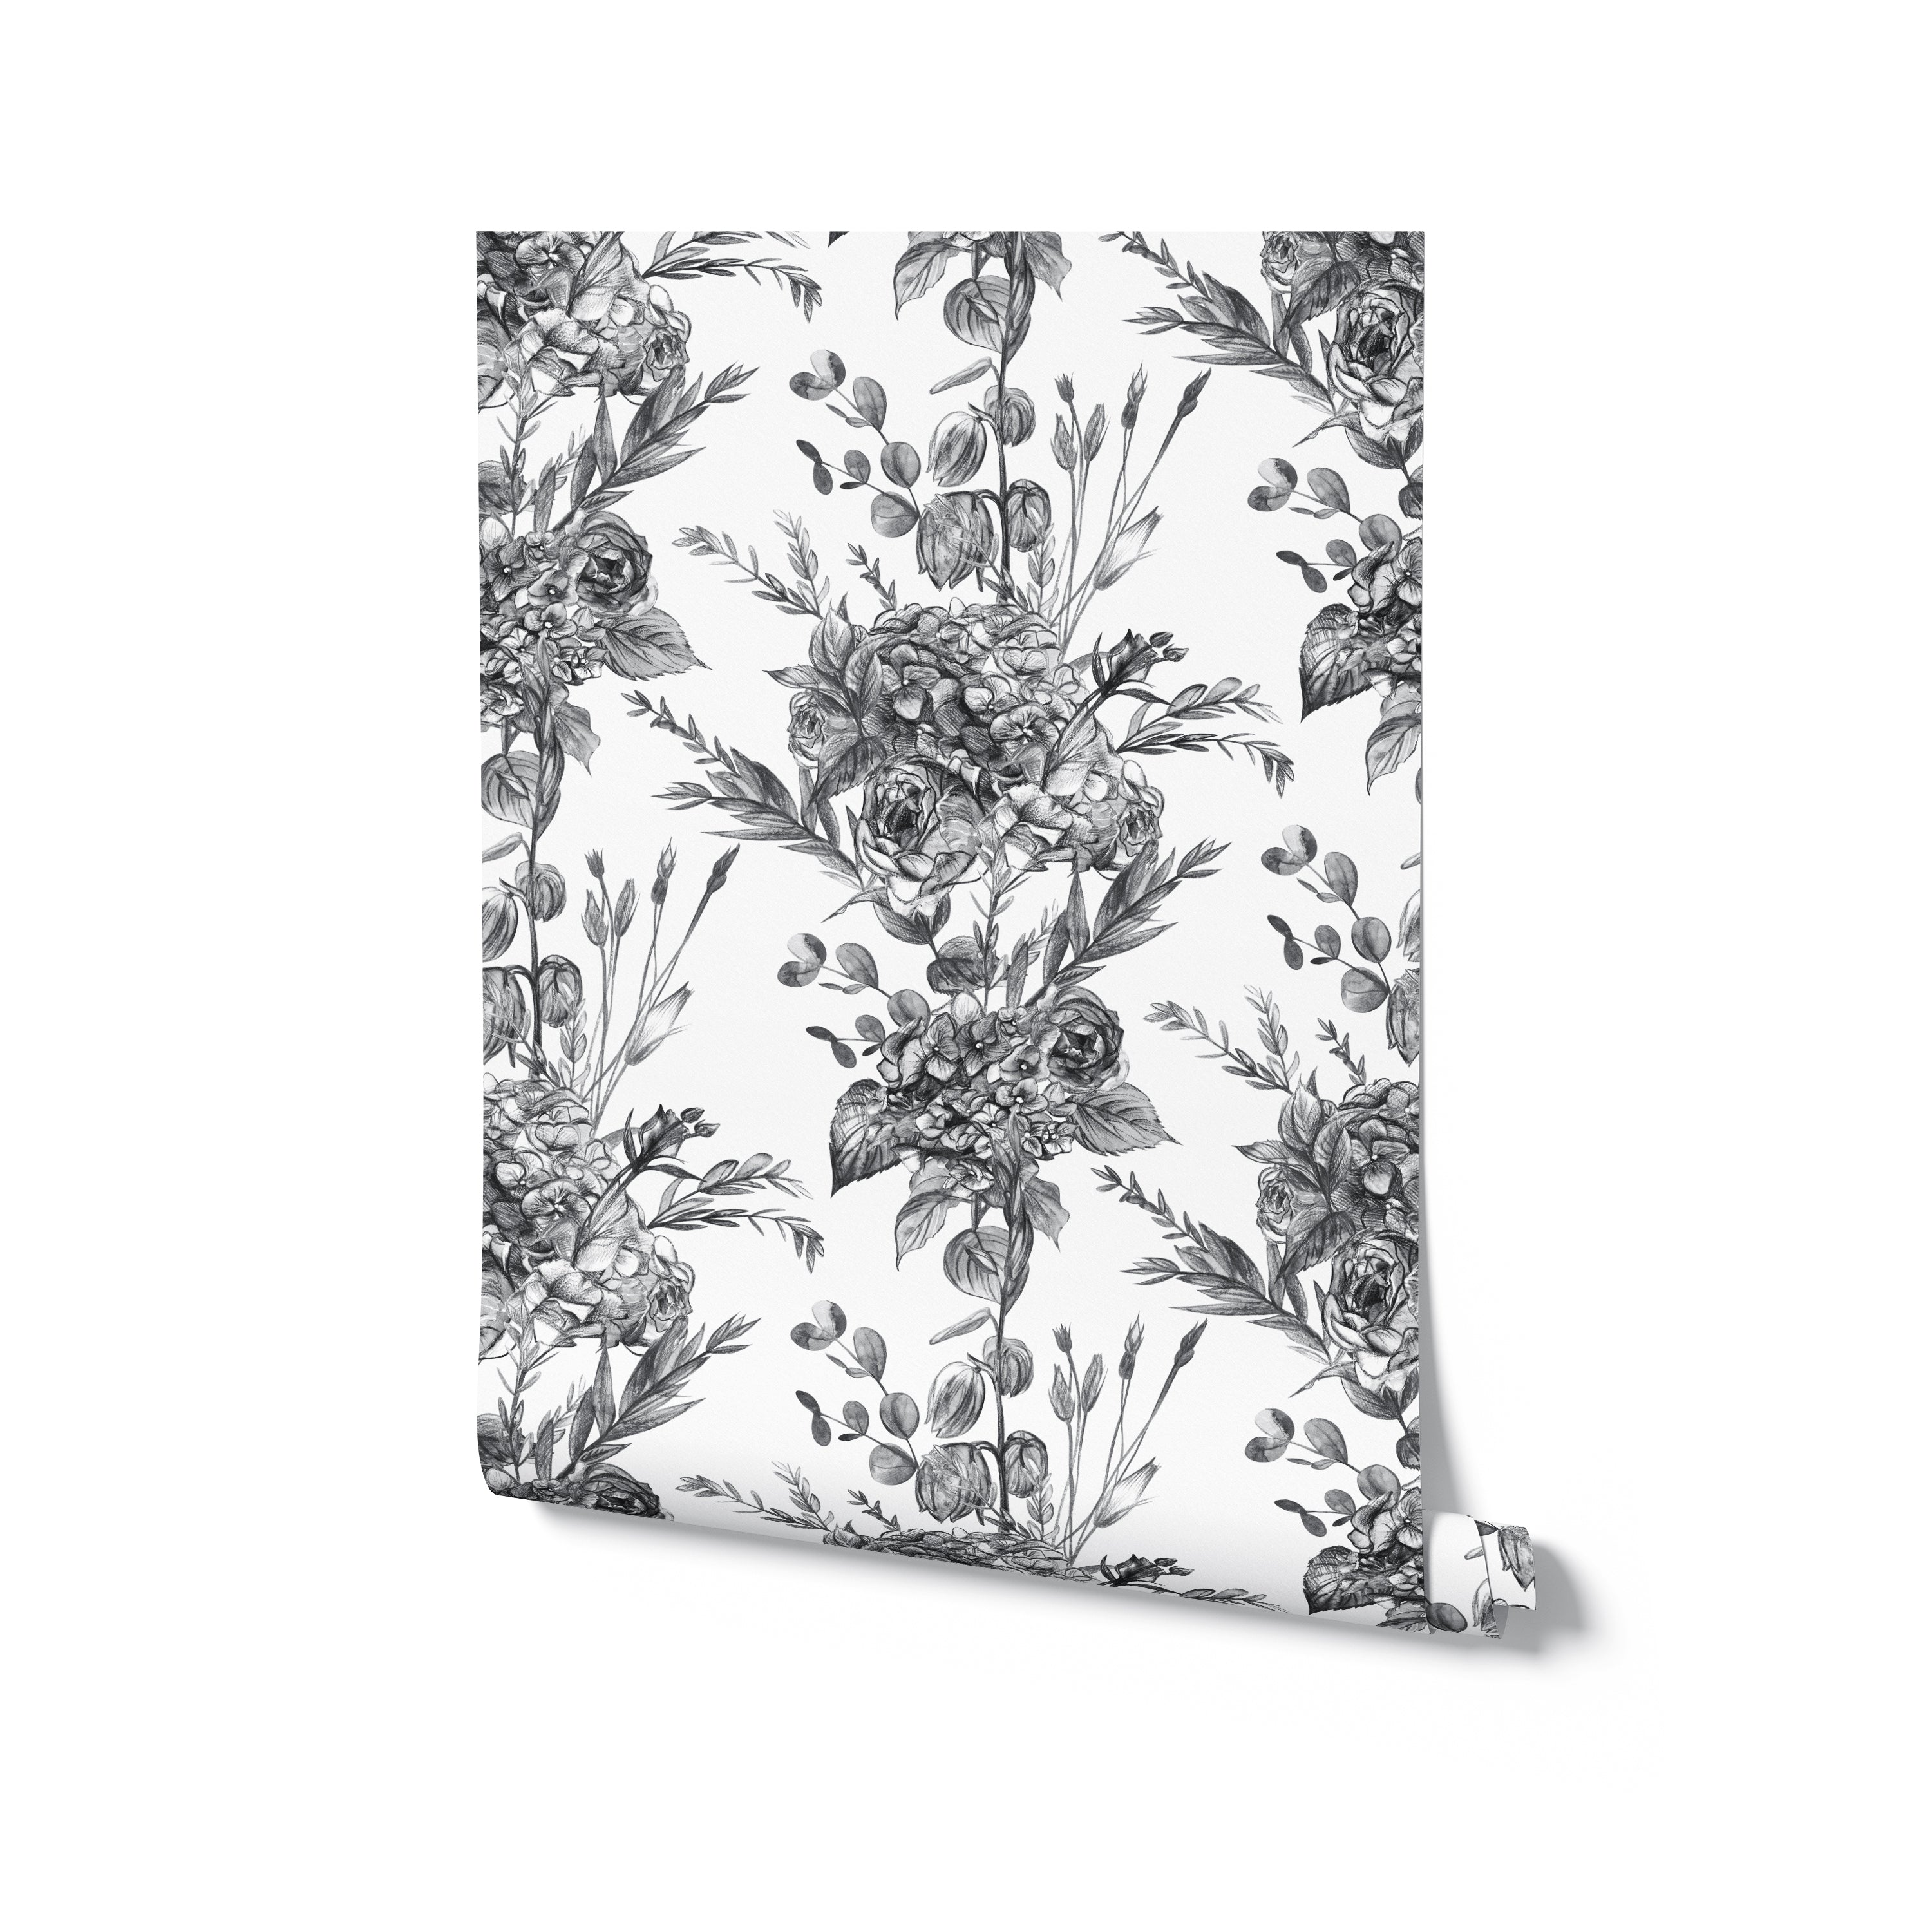 A roll of Graphite Garden Wallpaper showcasing its detailed floral pattern in grayscale. The wallpaper is neatly rolled, highlighting the intricate design and quality of the material, ideal for adding a touch of elegance to any room.